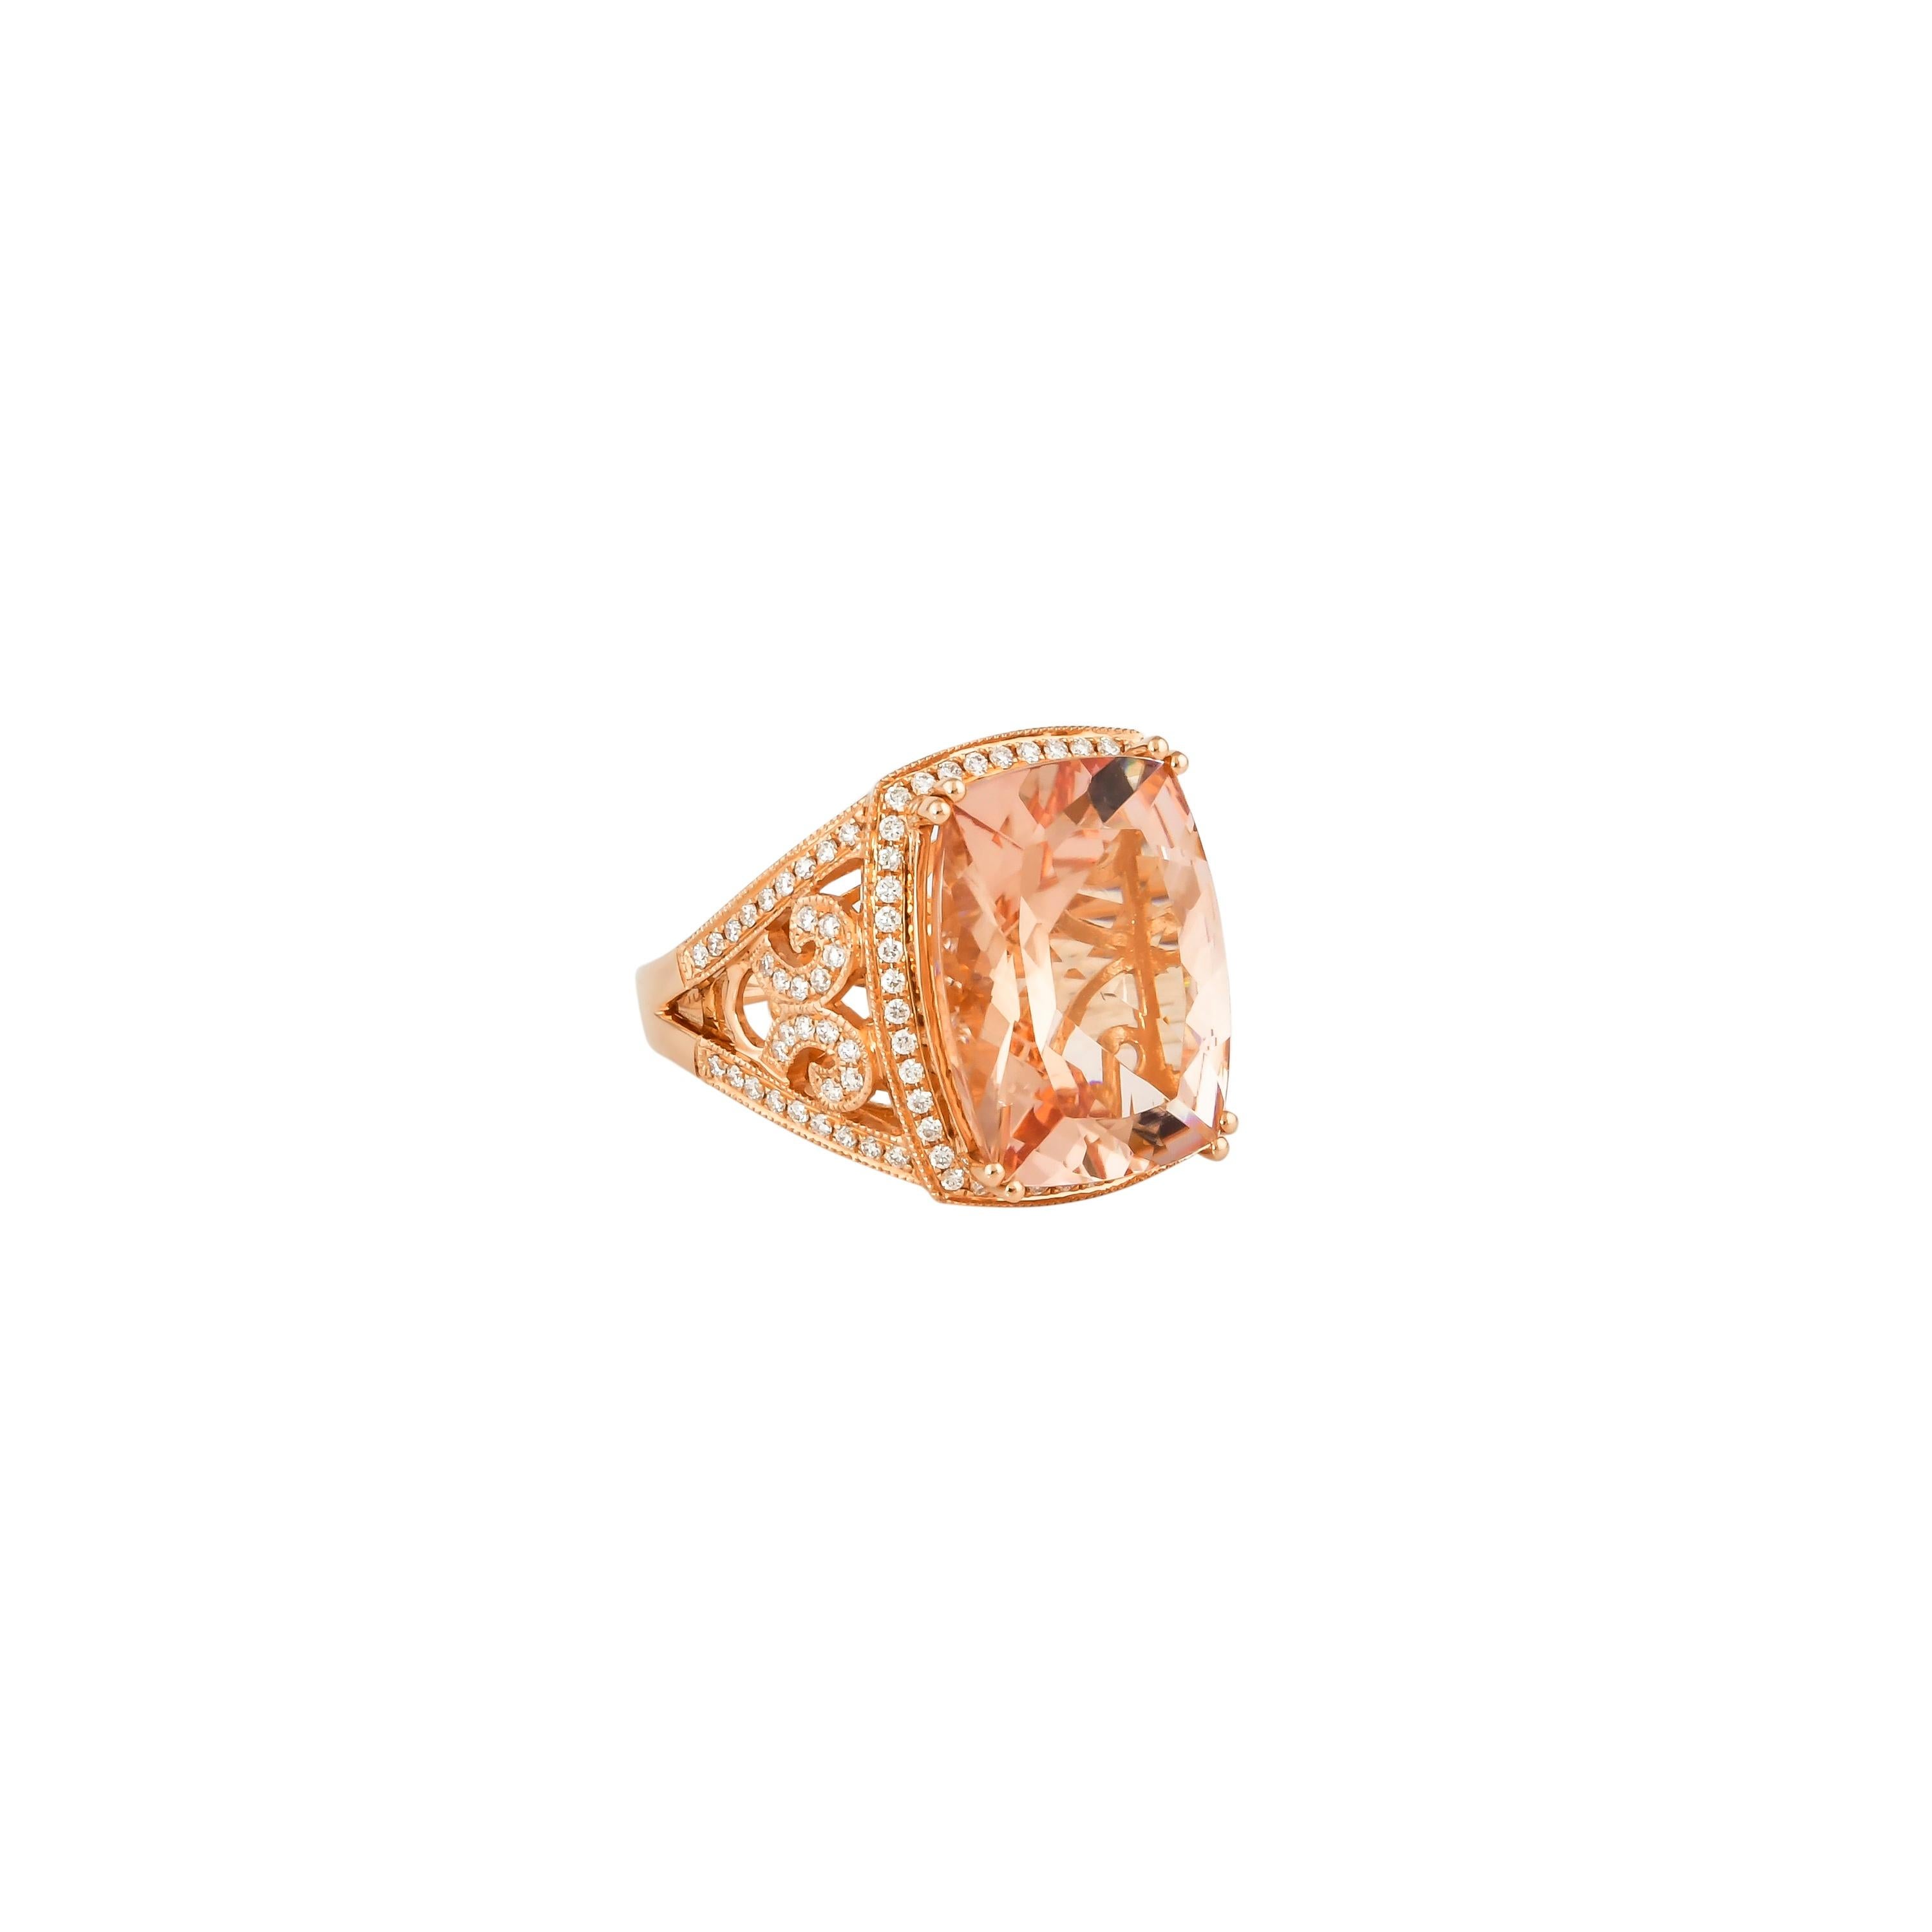 This collection features an array of magnificent morganites! Accented with diamonds these rings are made in rose gold and present a classic yet elegant look. 

Classic morganite ring in 18K rose gold with diamonds. 

Morganite: 9.03 carat cushion